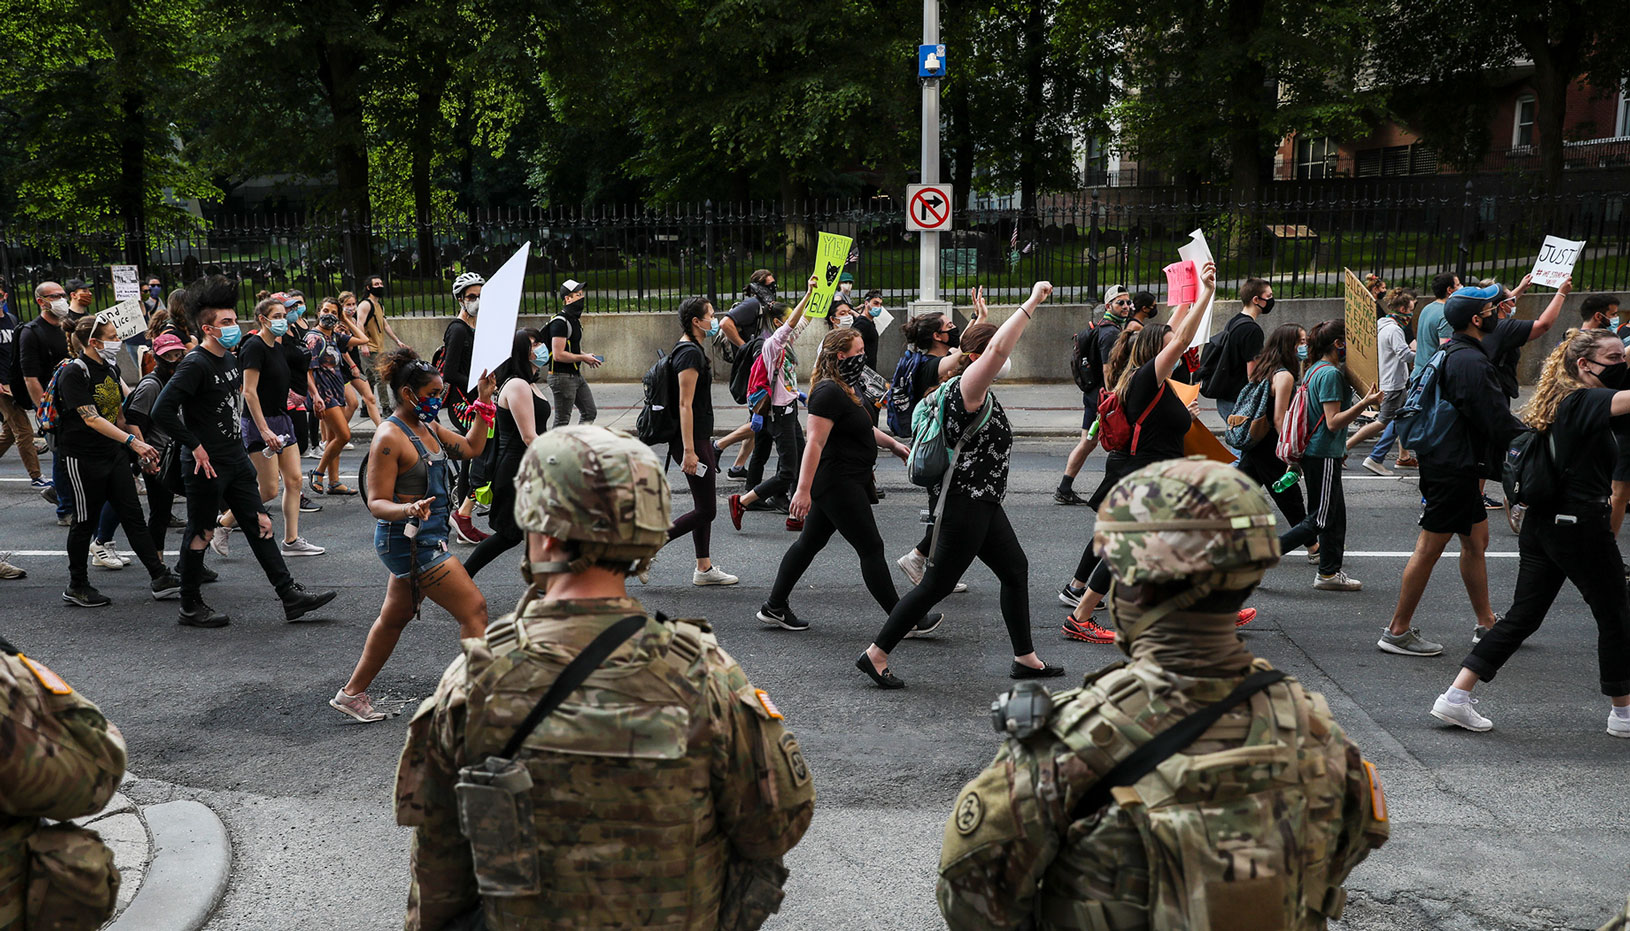 Protest overseen by National Guard